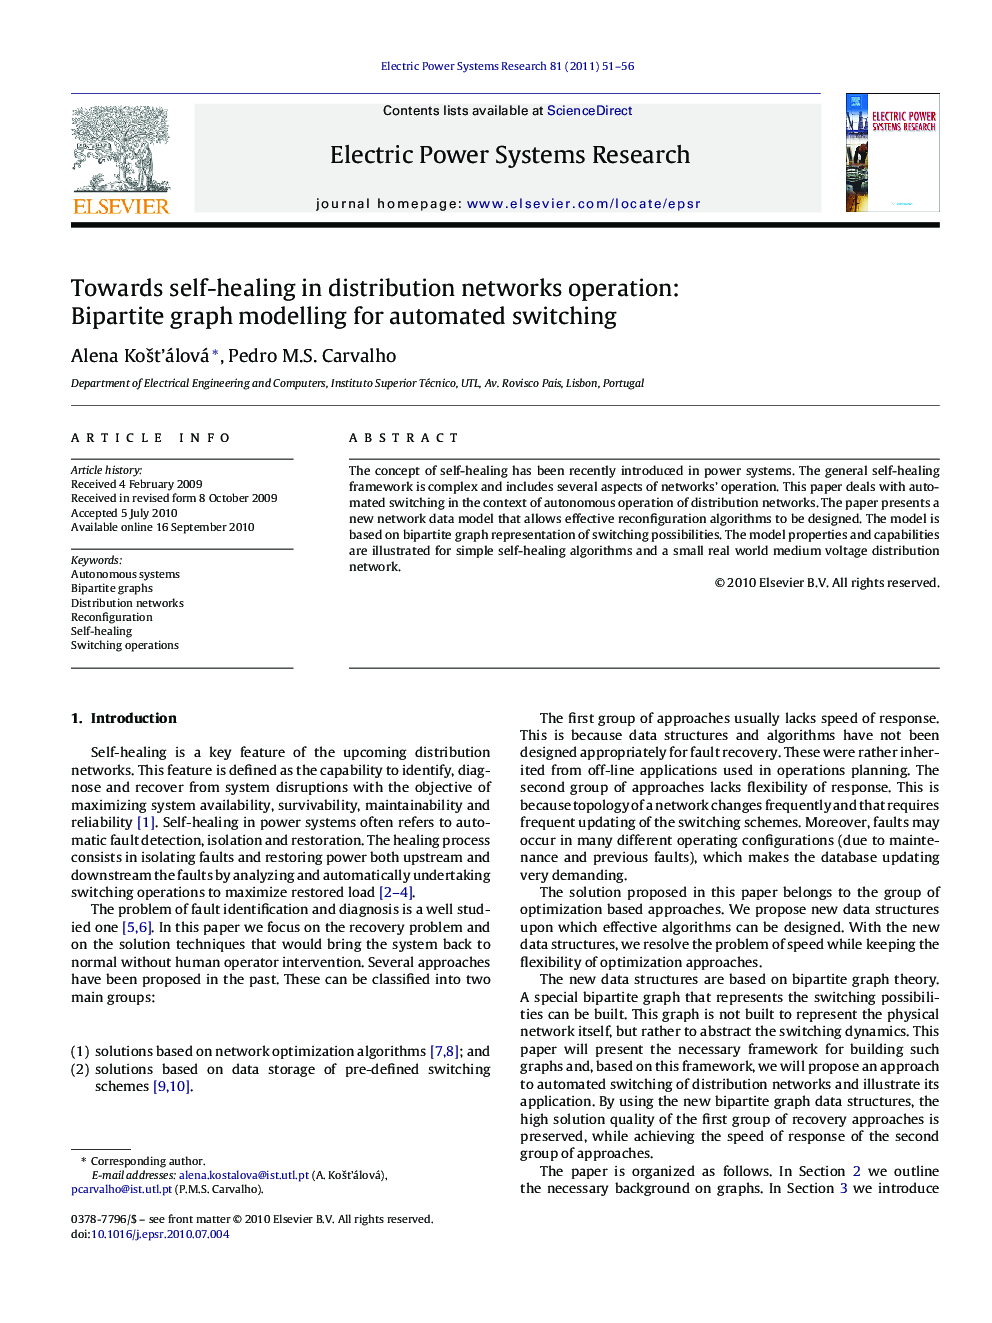 Towards self-healing in distribution networks operation: Bipartite graph modelling for automated switching